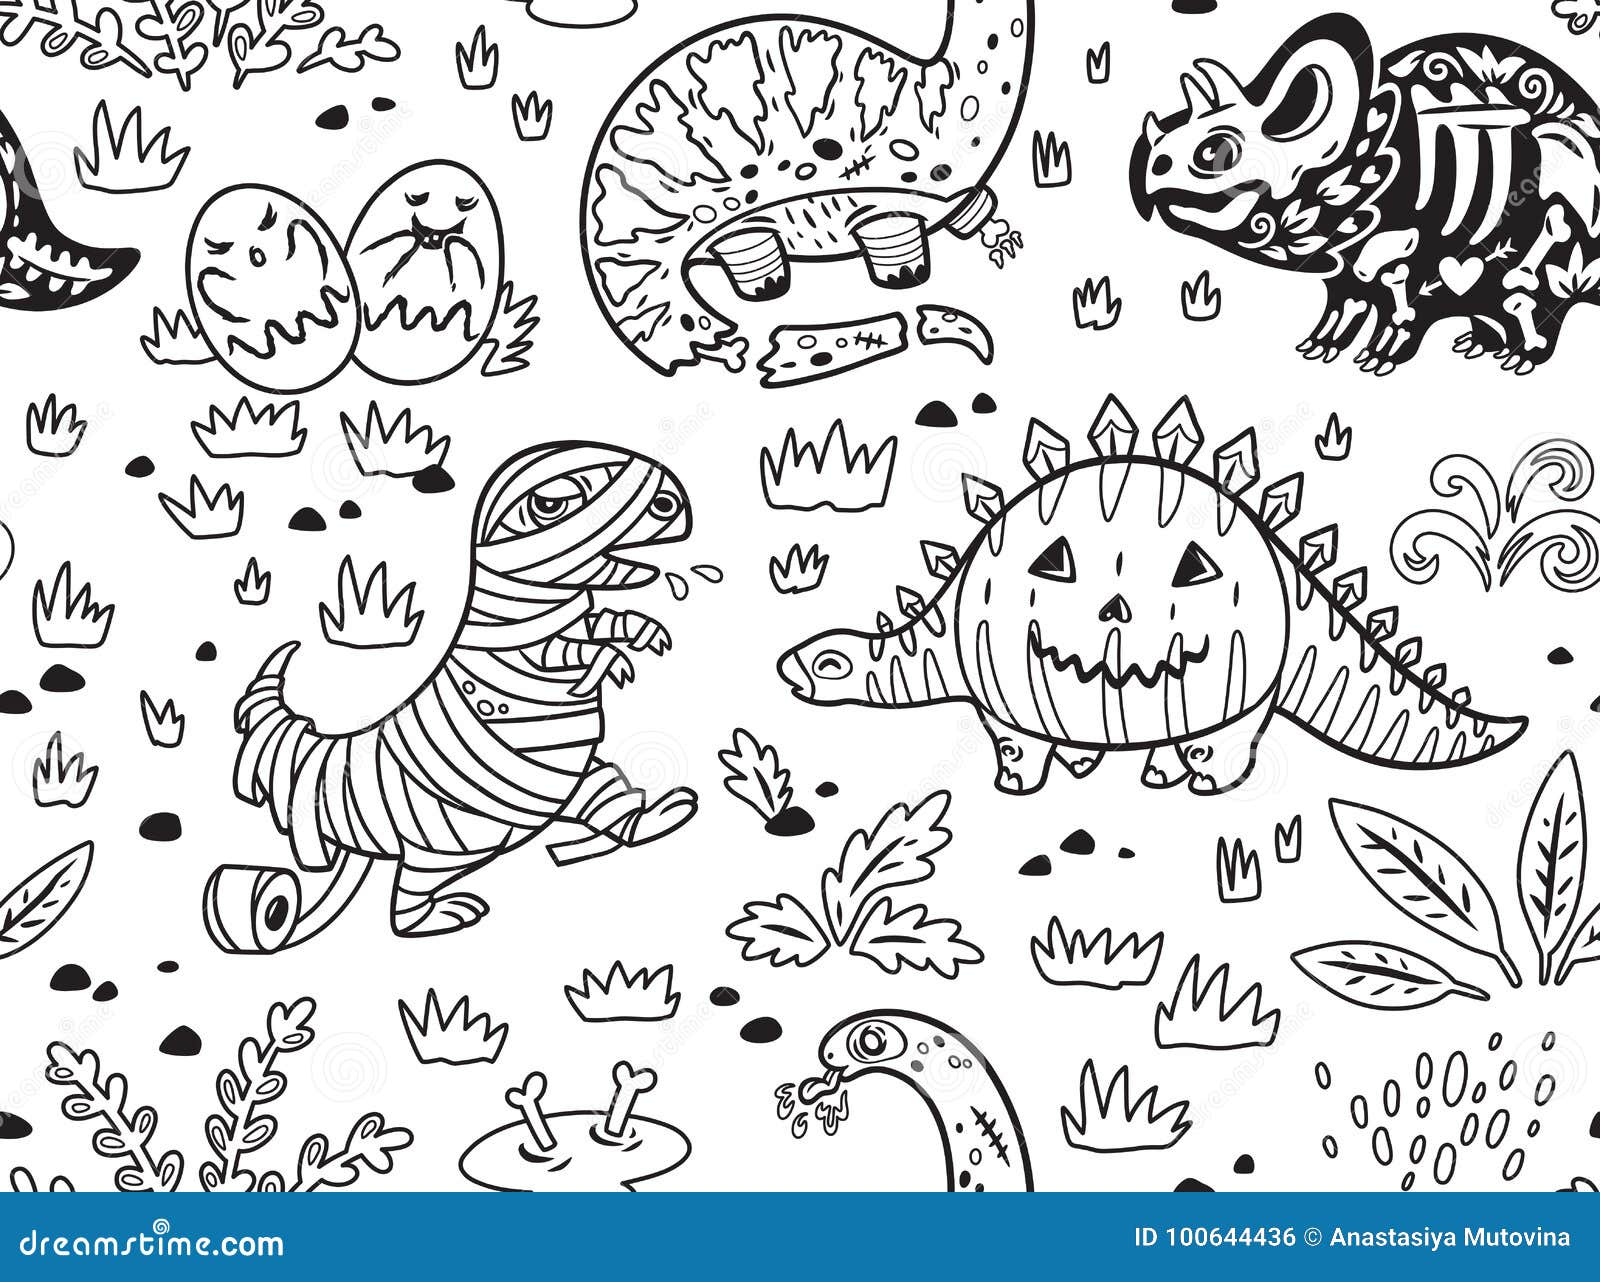 Ink dinosaurs in costumes for halloween vector set of characters stock vector